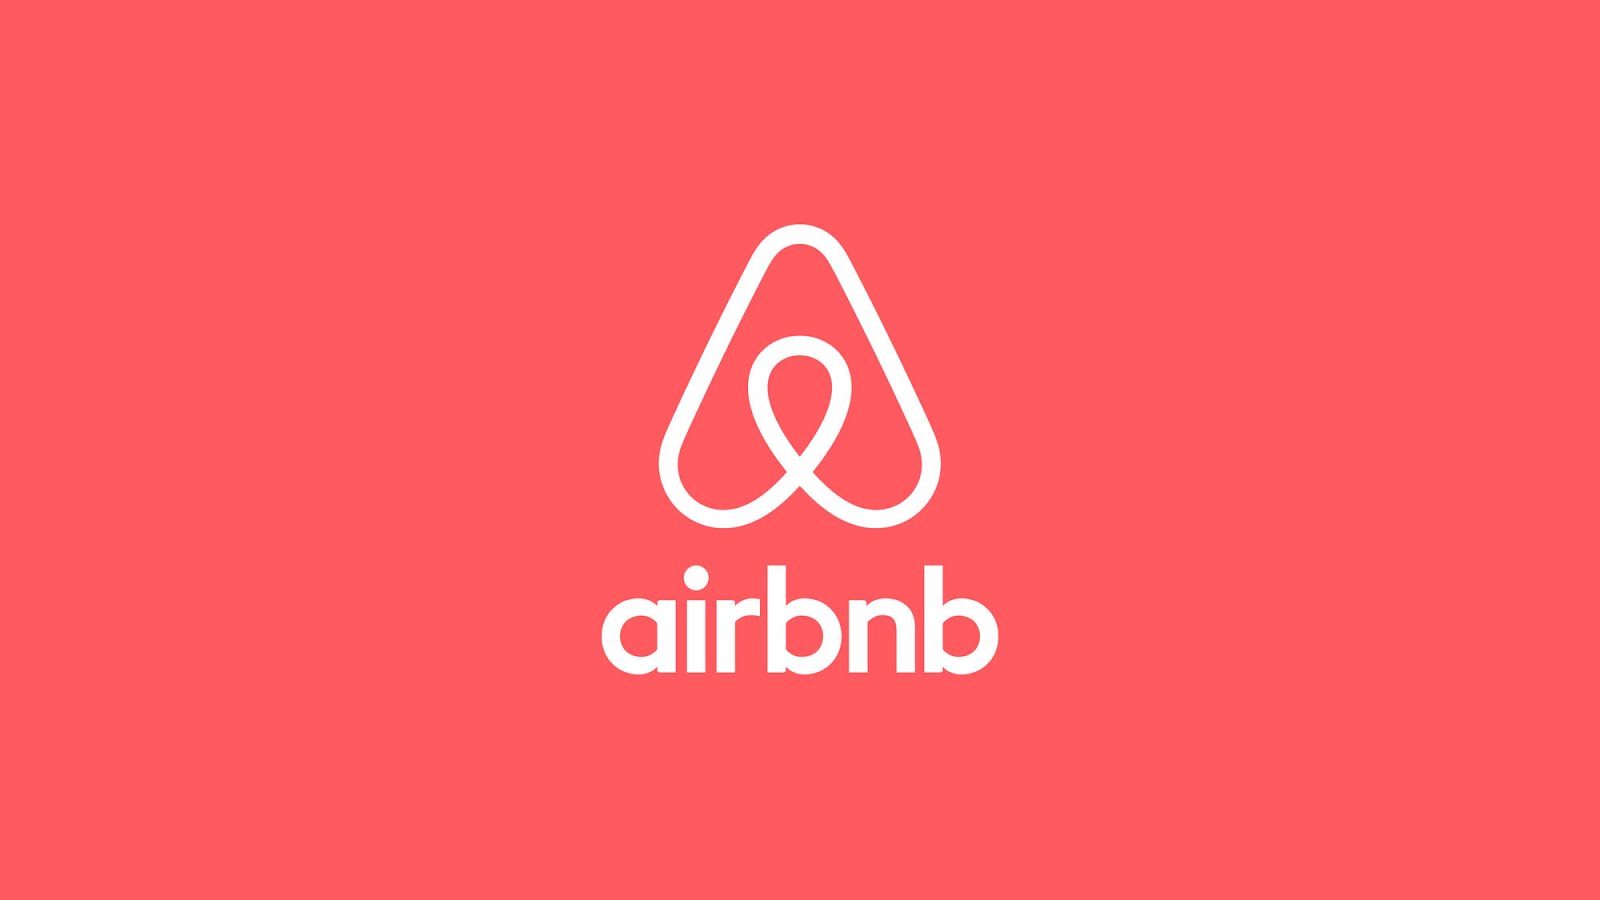 {FREE CREDIT} Use my link & get free S$50 Airbnb travel credit!